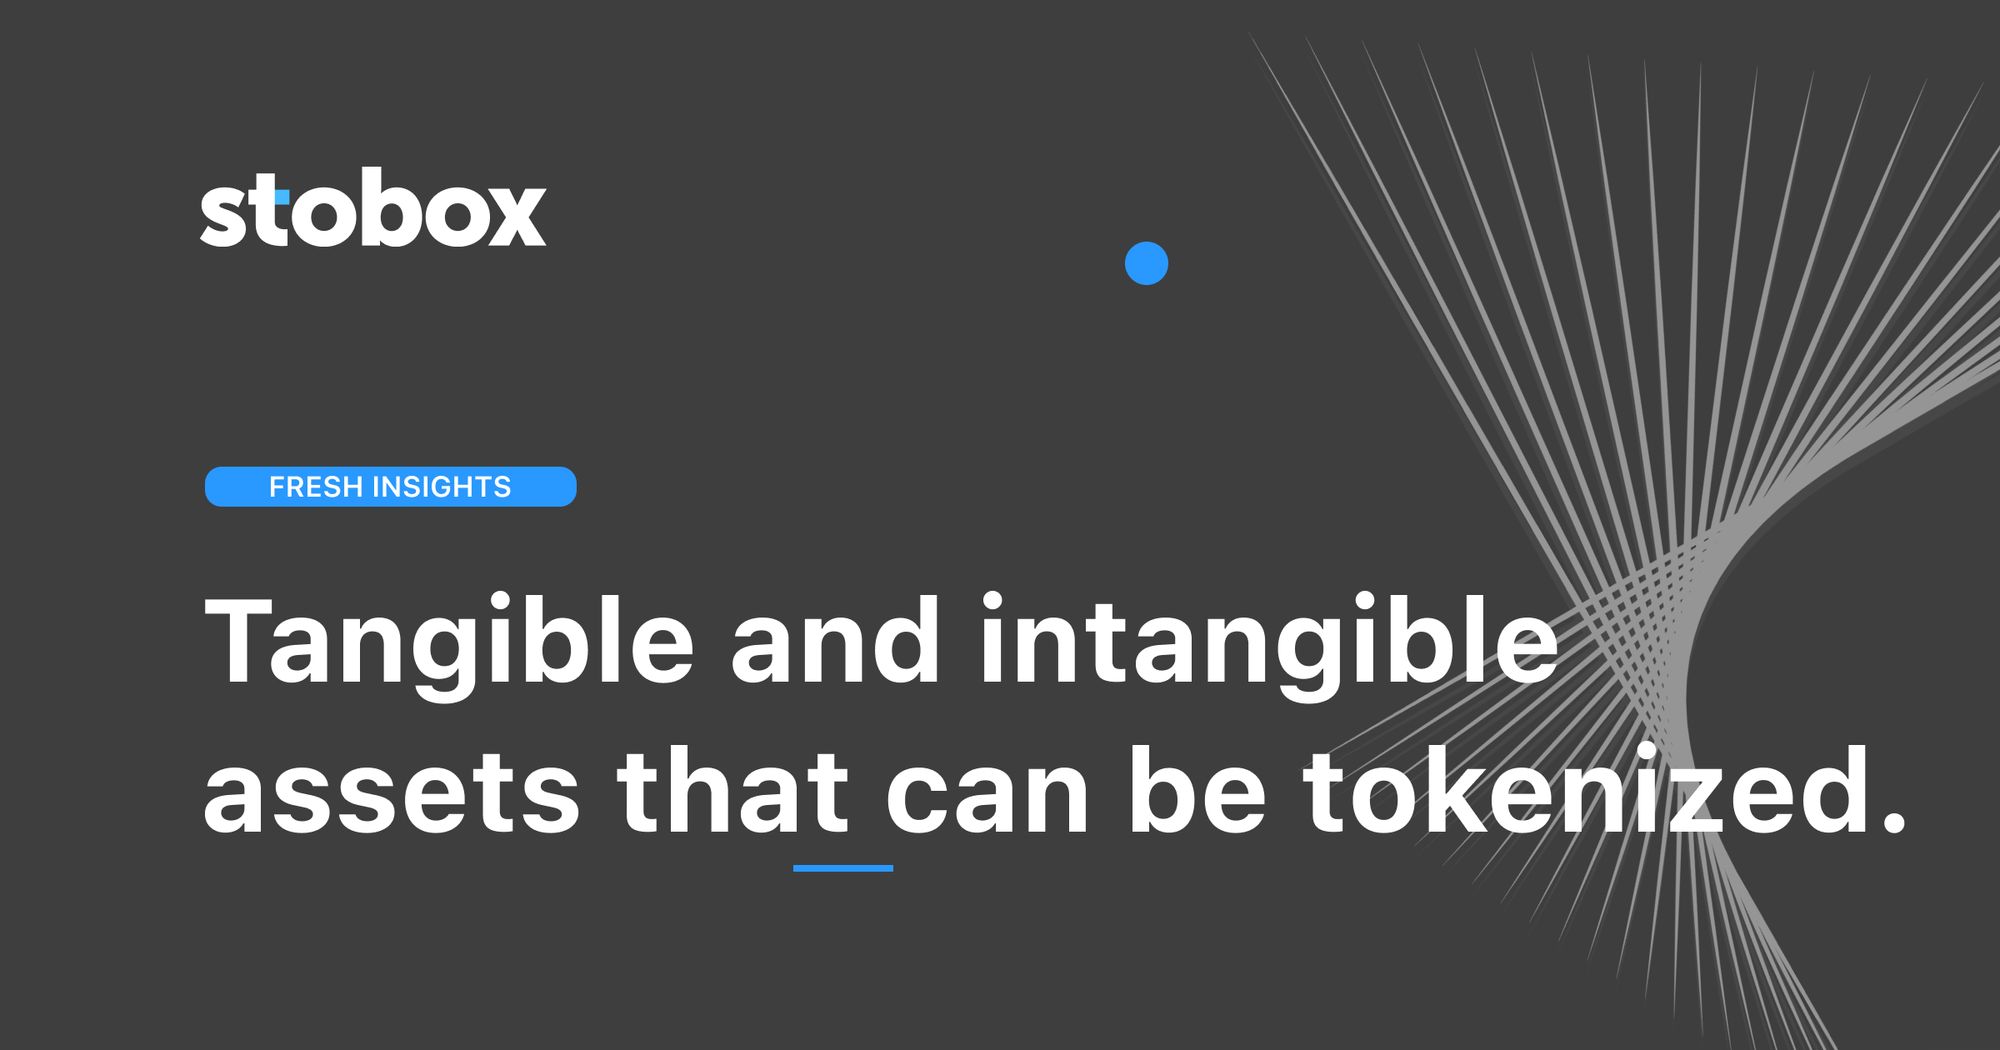 Tangible and intangible assets that can be tokenized.